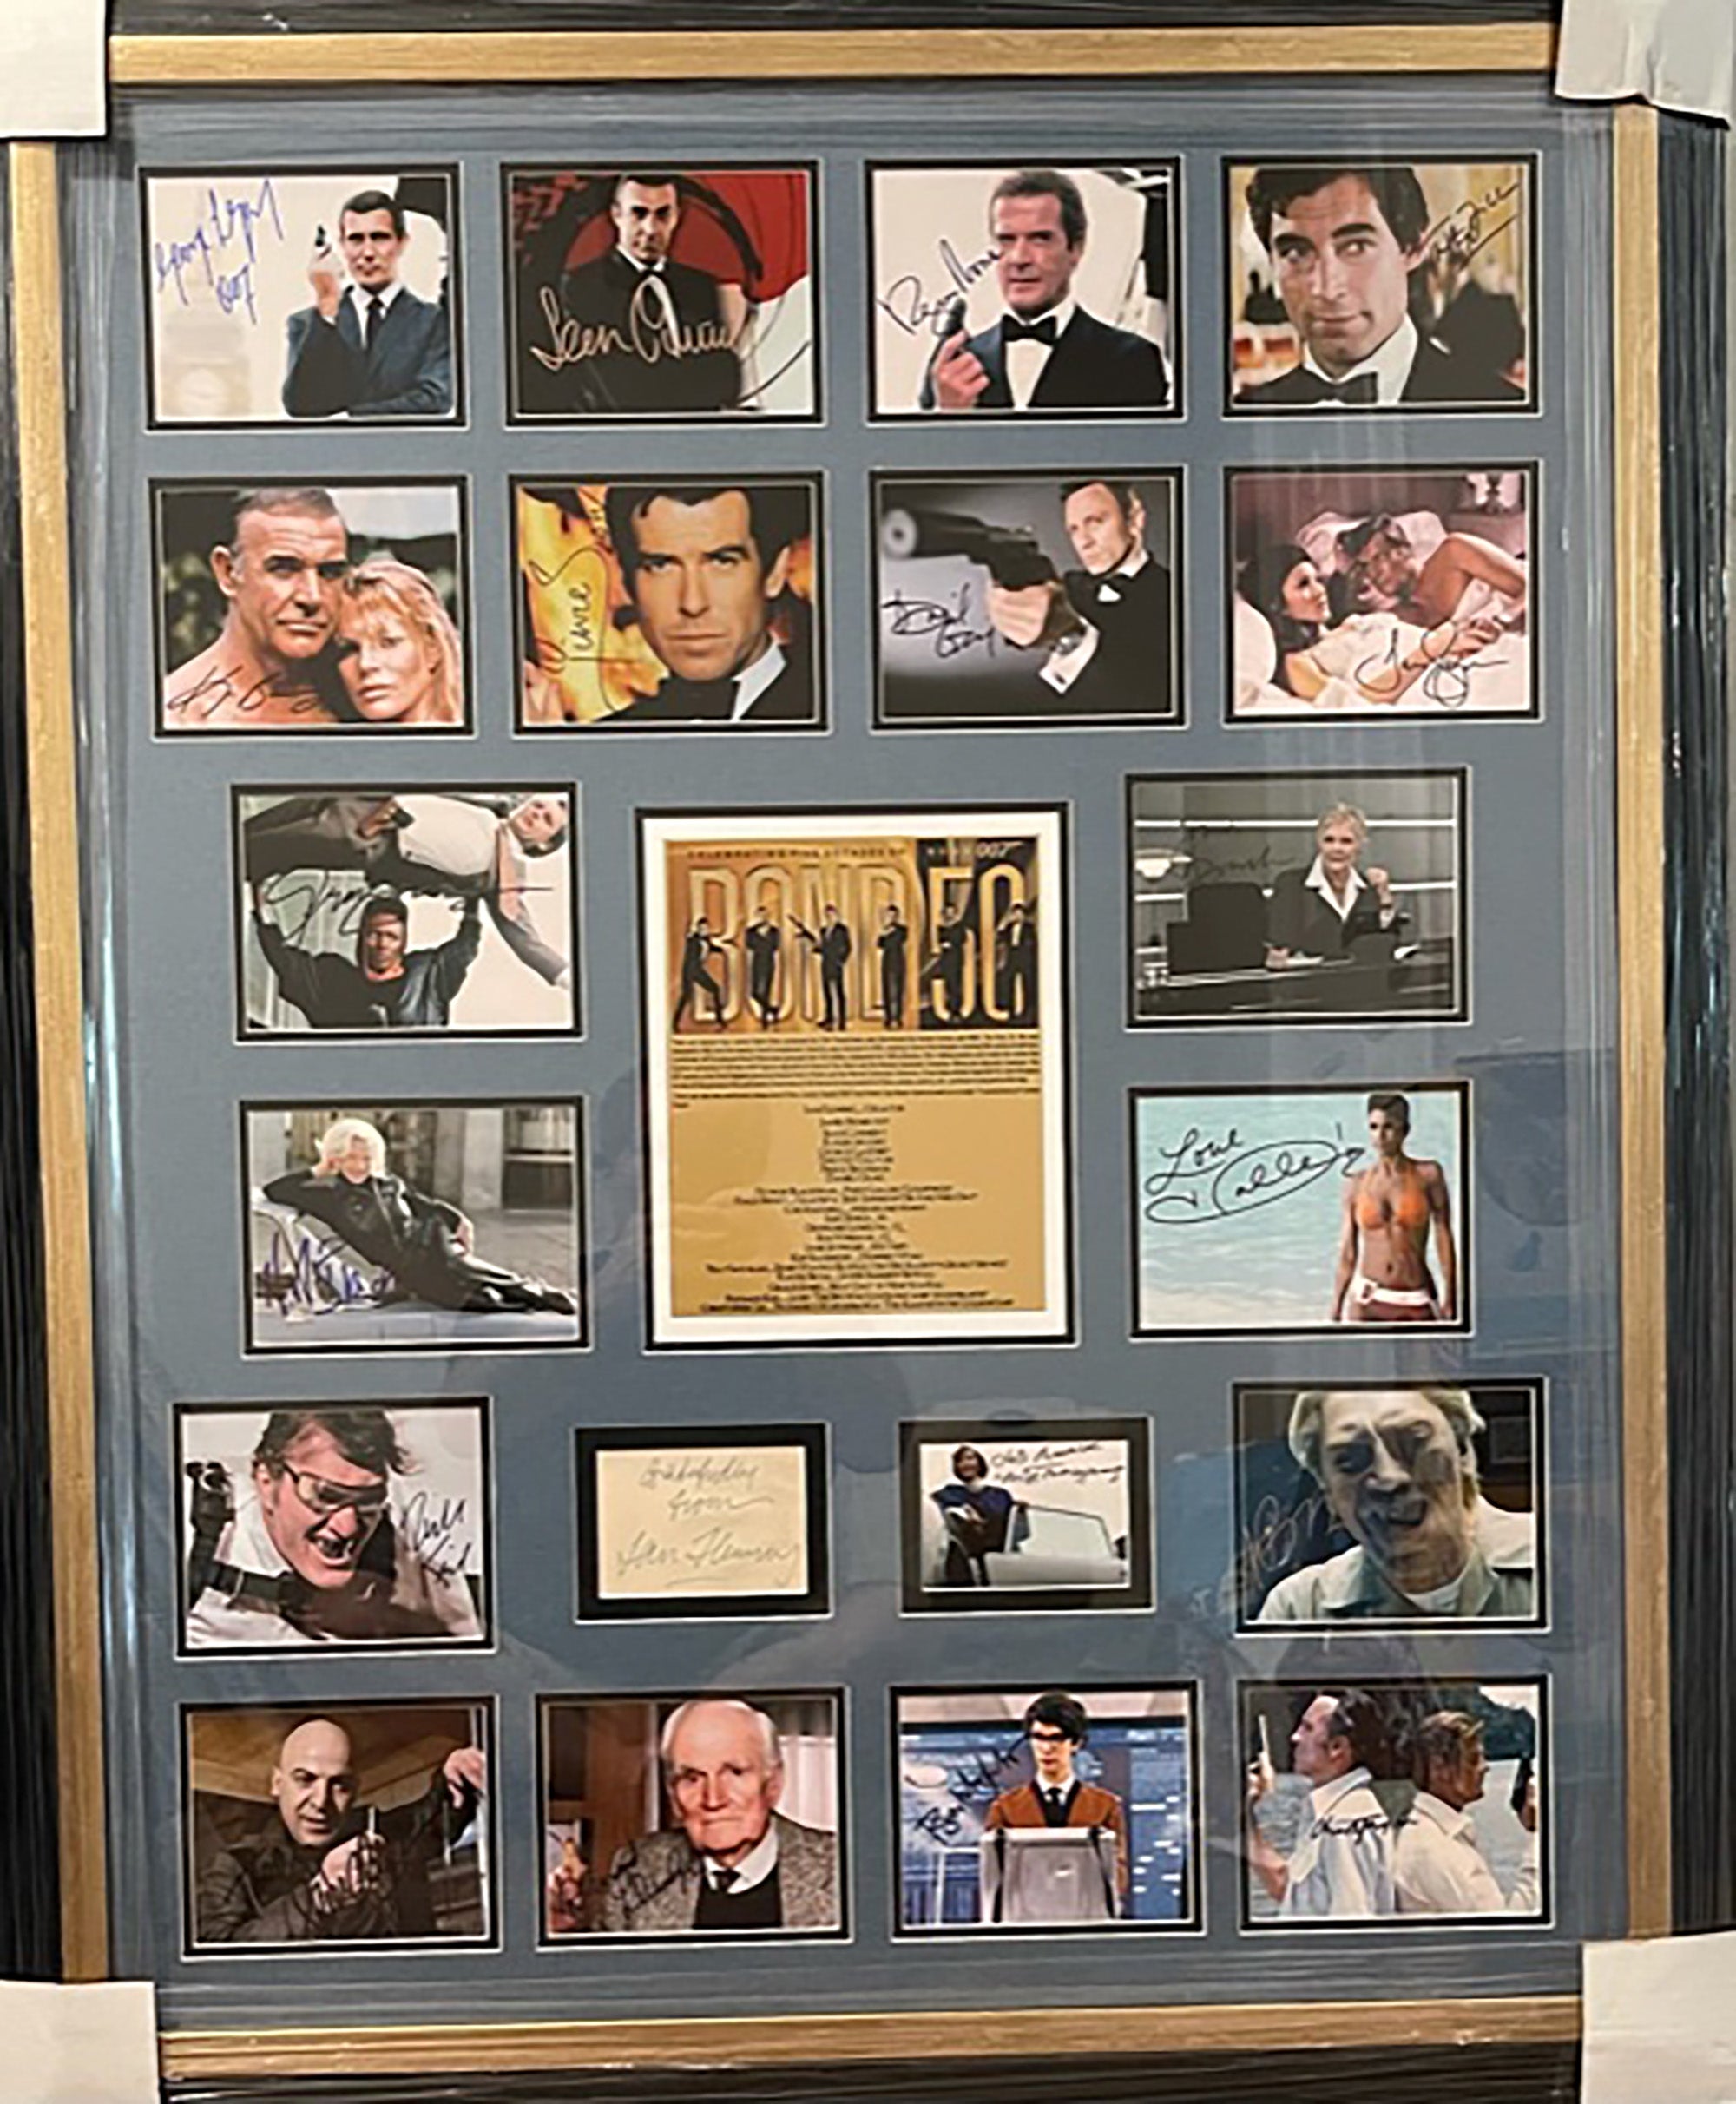 Sean Connery, Roger Moore, Daniel Craig, James Bond 007 cast signed  and framed with proof